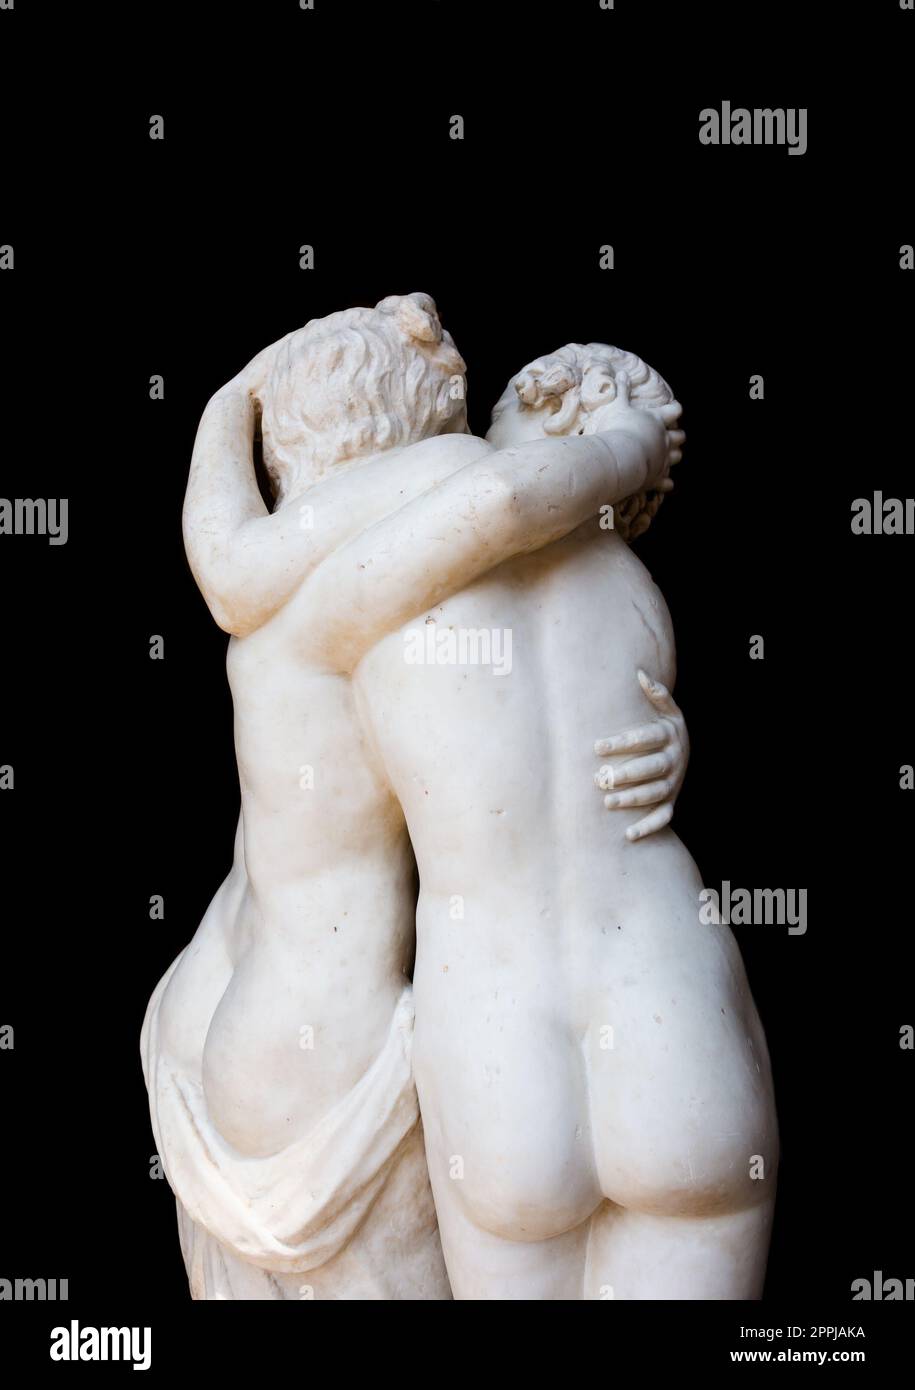 Togetherness emotion. Statue of two people embracing with passion Stock Photo